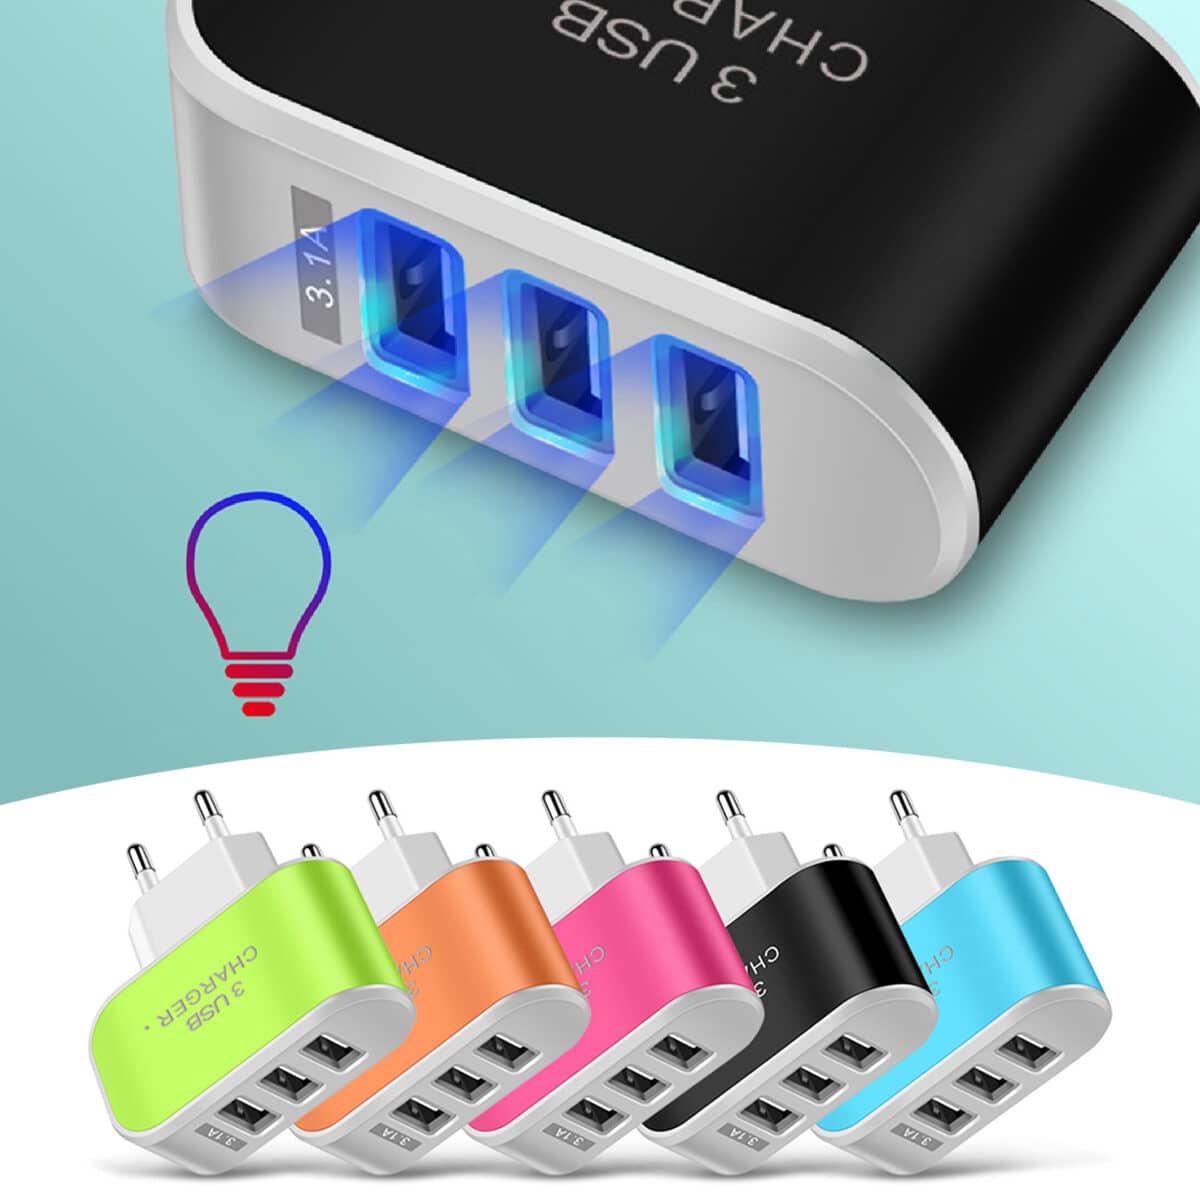 3usb-candy-charger-led-luminous-mobile-phone-charging-head-intelligent-multi-port-usb-charger-travel-charging